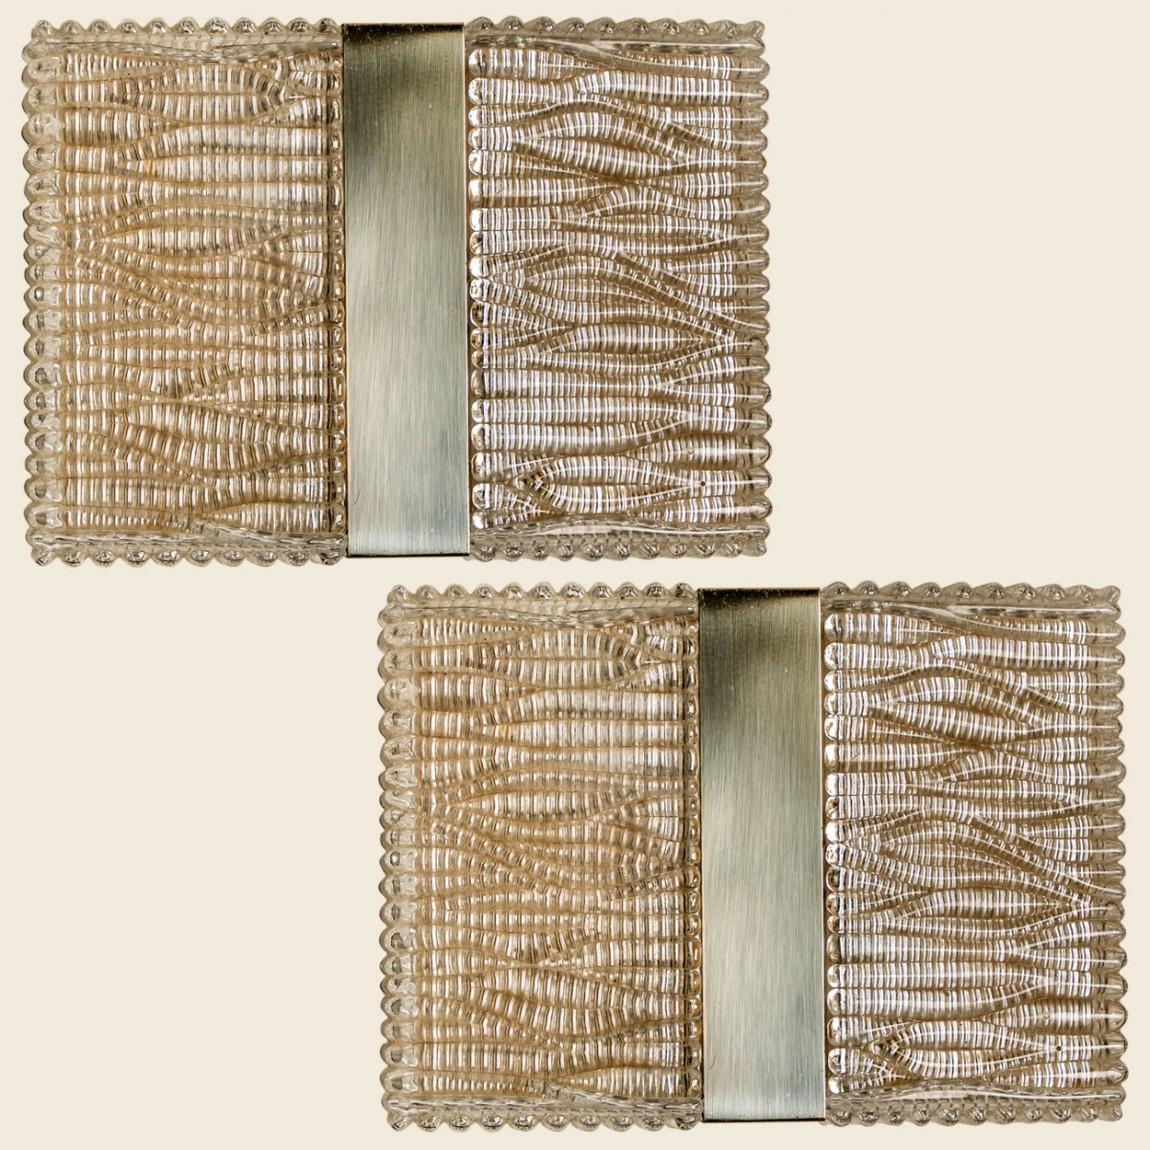 Wonderful stylish textured glass wall lights from Limburg Glashütte produced in Germany, Europe in the 1970s.
The lights are rectangular shaped and made of textured glass with a chrome center.

In good vintage condition. Good. Lightly used, with